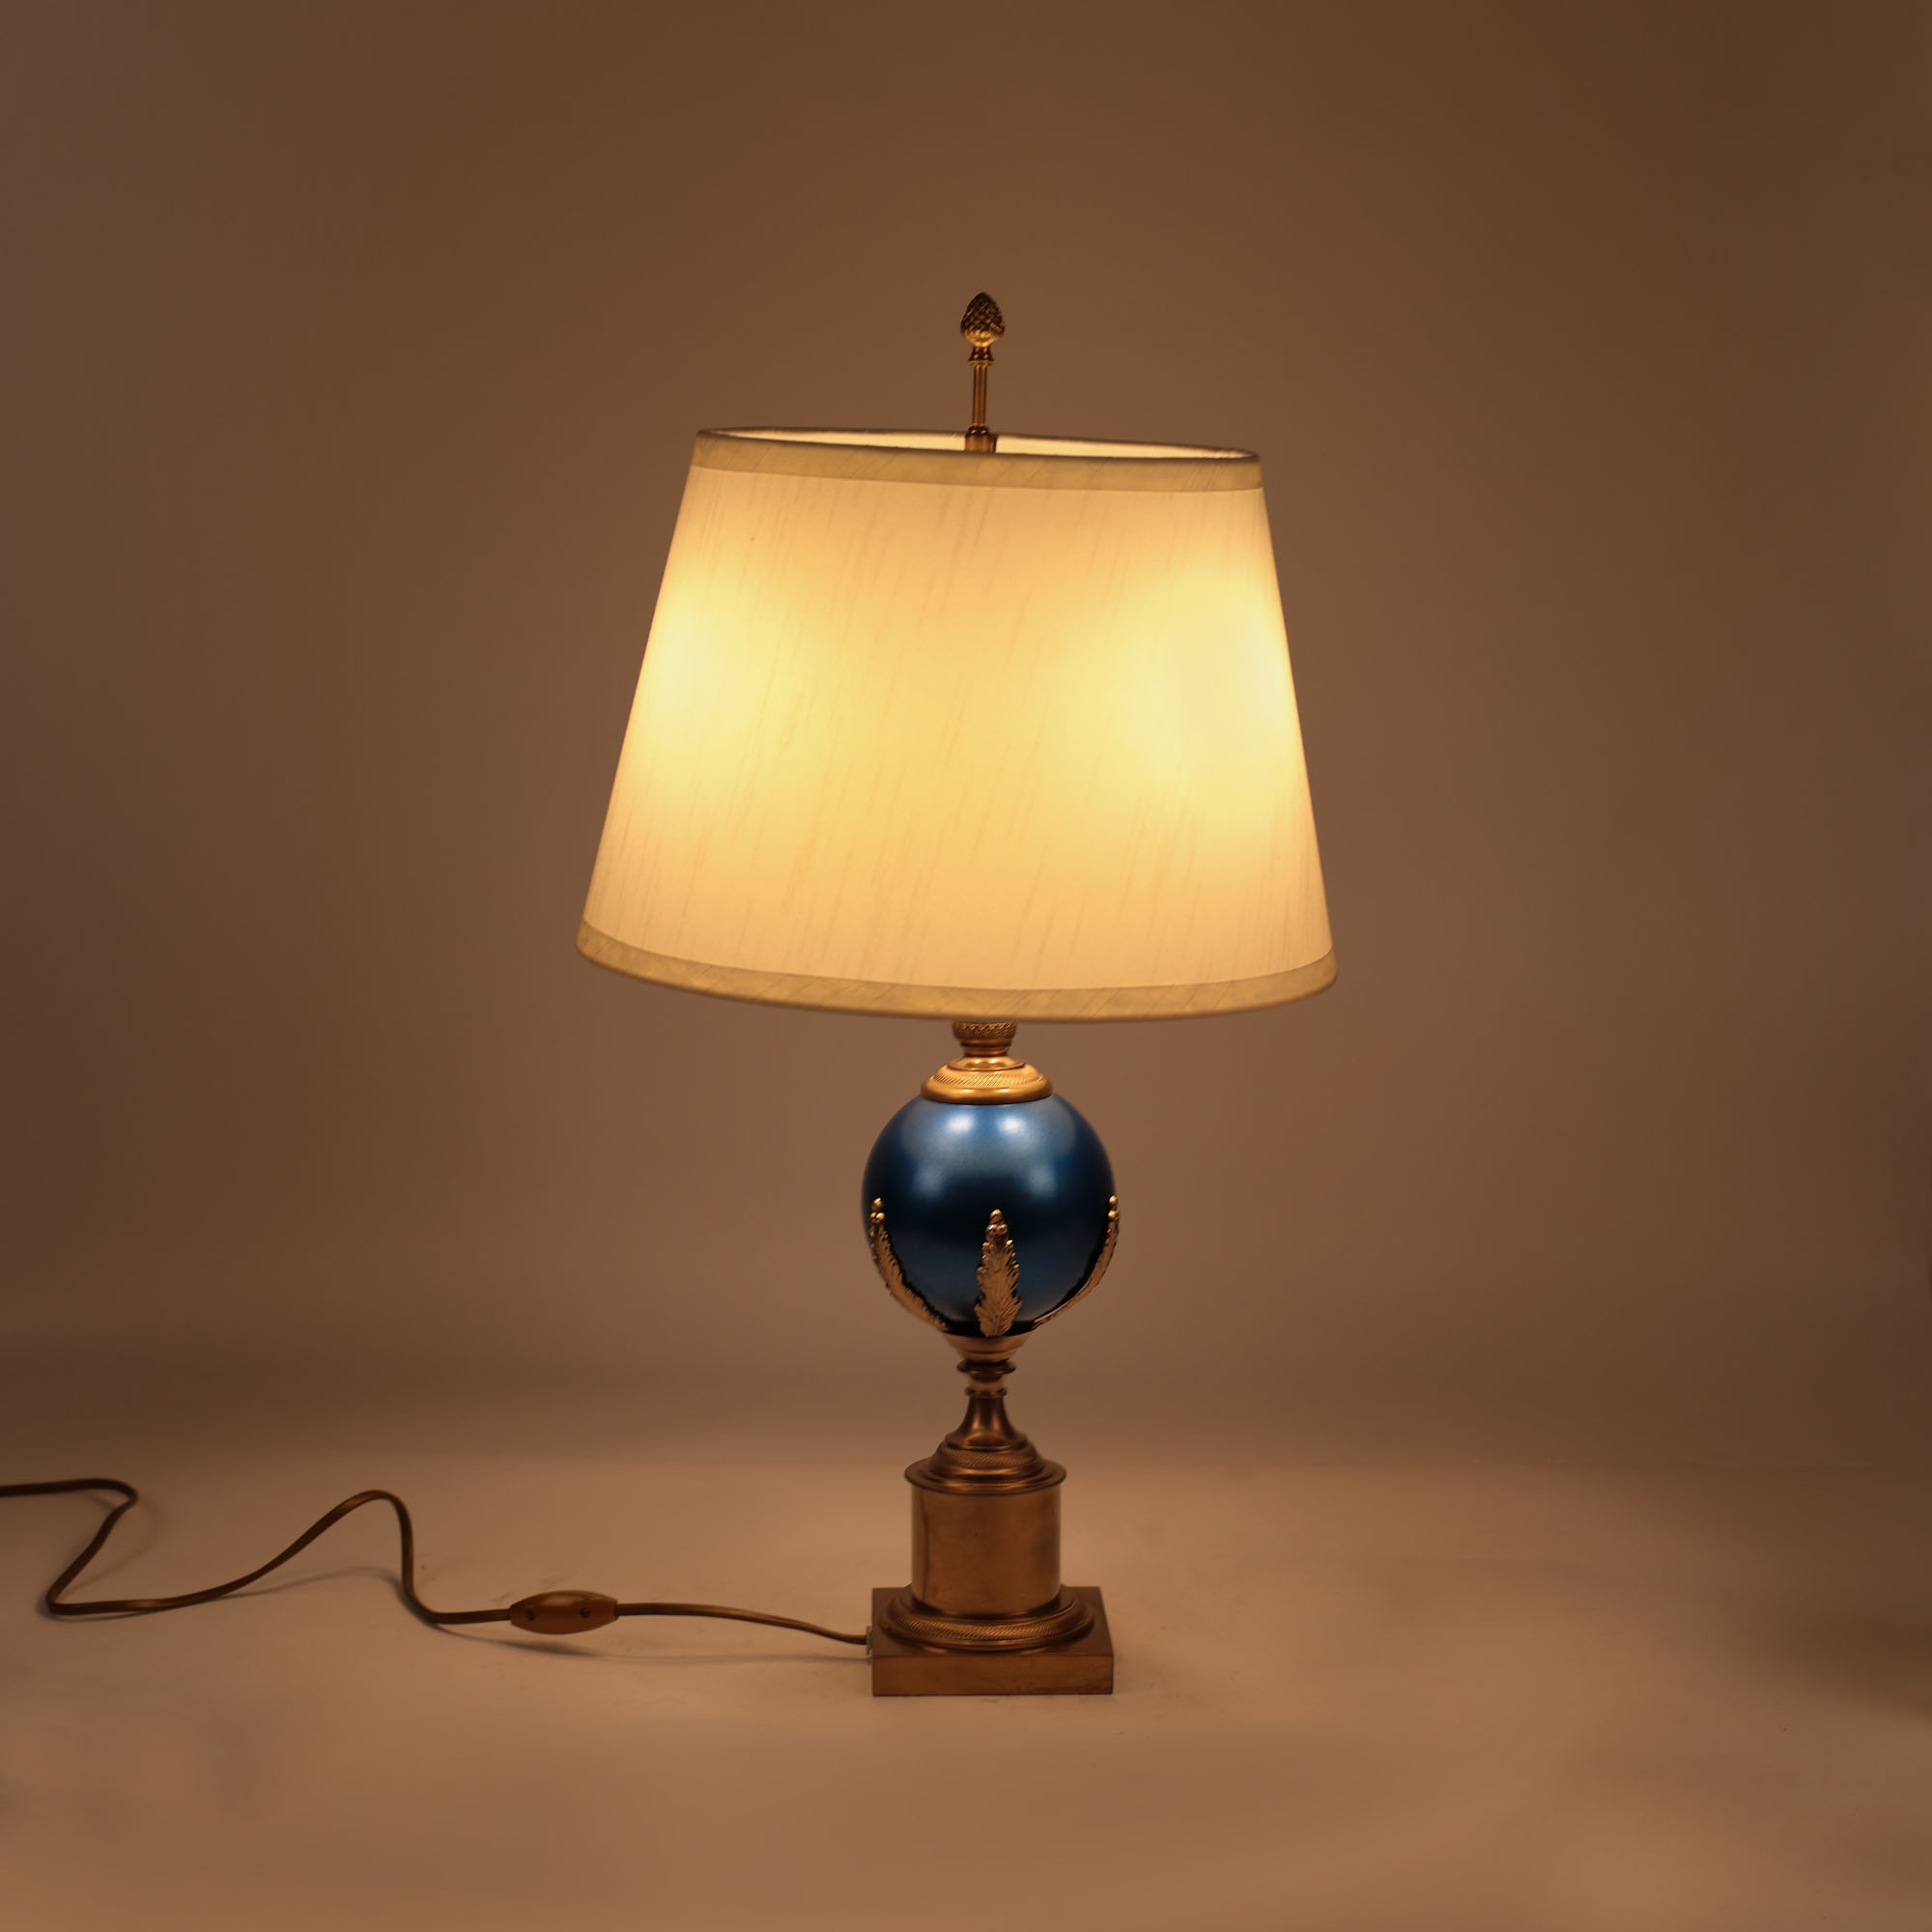 French workshop, Table lamp made by Maison Charles, gilded bronze, decorated with plant elements and - Image 2 of 5